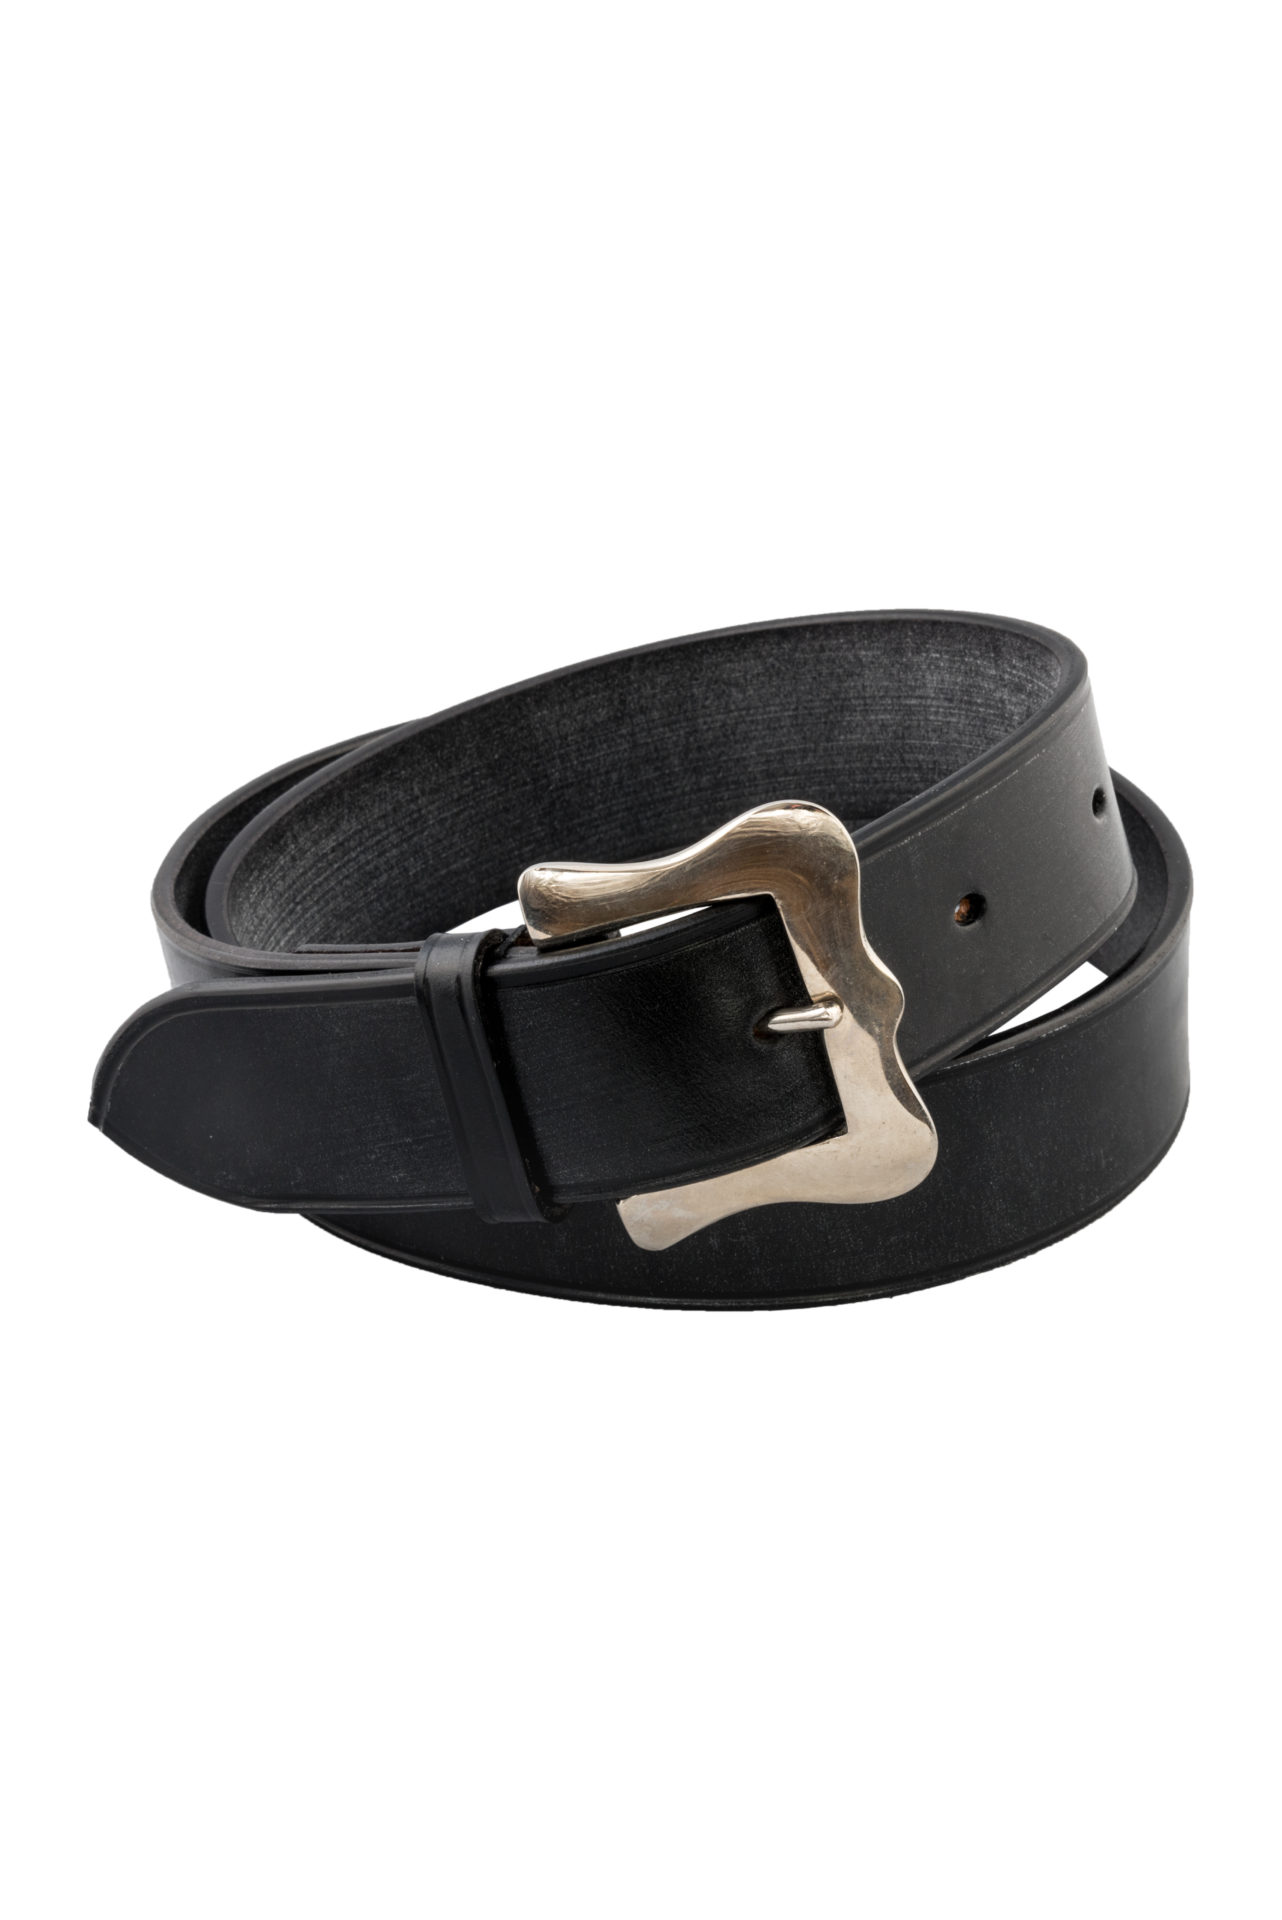 The Ploughmans Black Leather Belt — Great English Outdoors